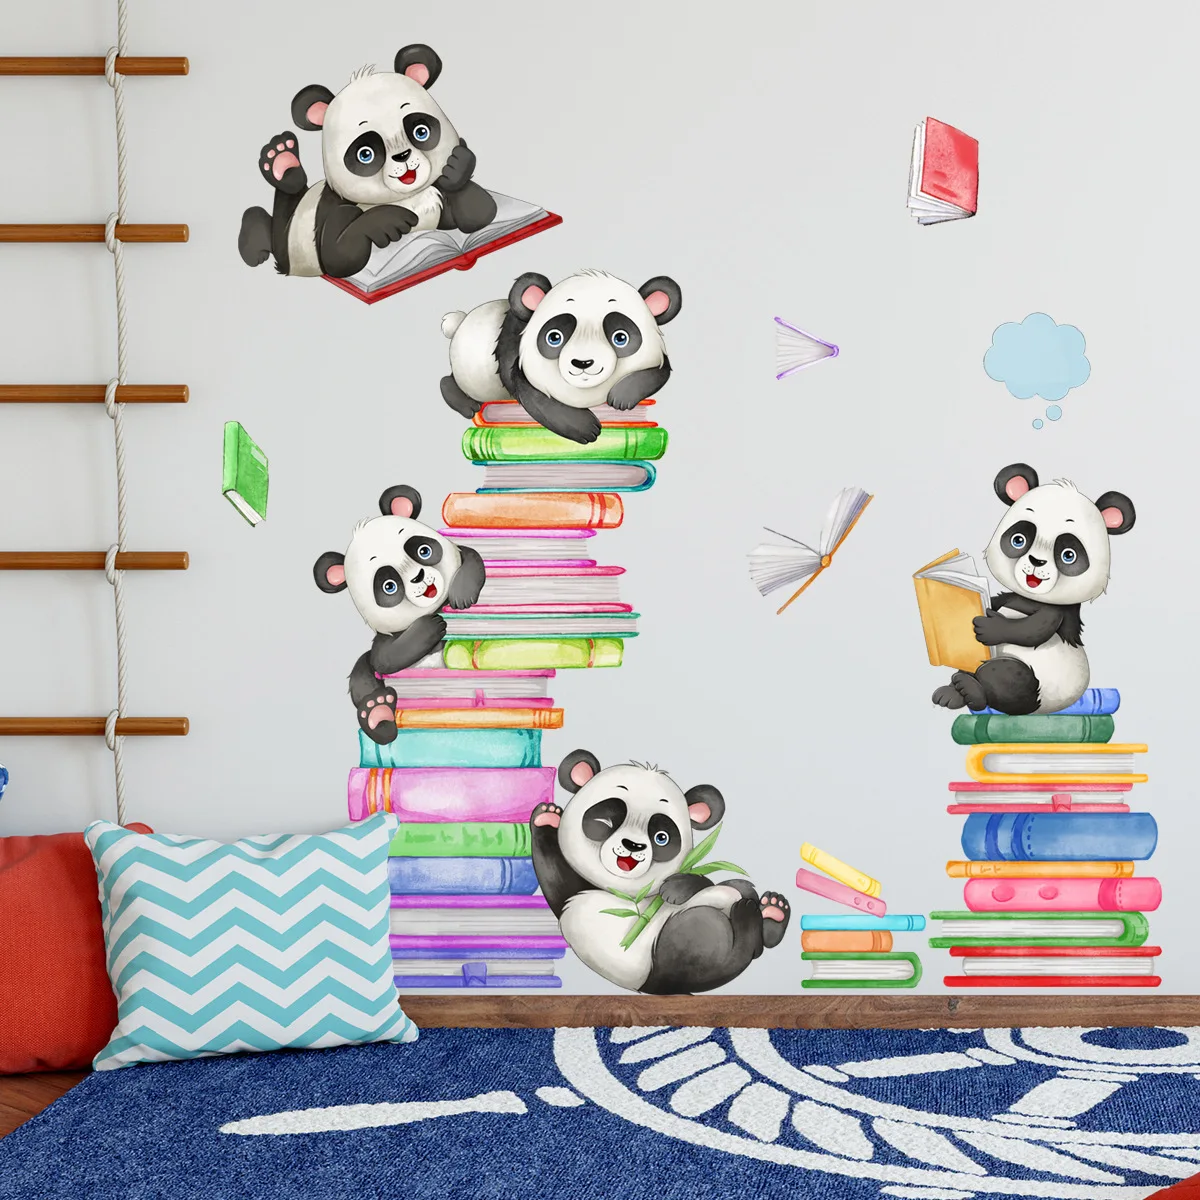 2pcs Animal Panda Book Cartoon Wall Stickers Dormitory Background Wall Home Decoration Wall Stickers Mural Wallpaper Ms6263 aluminum foil self adhesive wallpaper commercial clothing store thickened home decoration waterproof anti scalding wall sticker